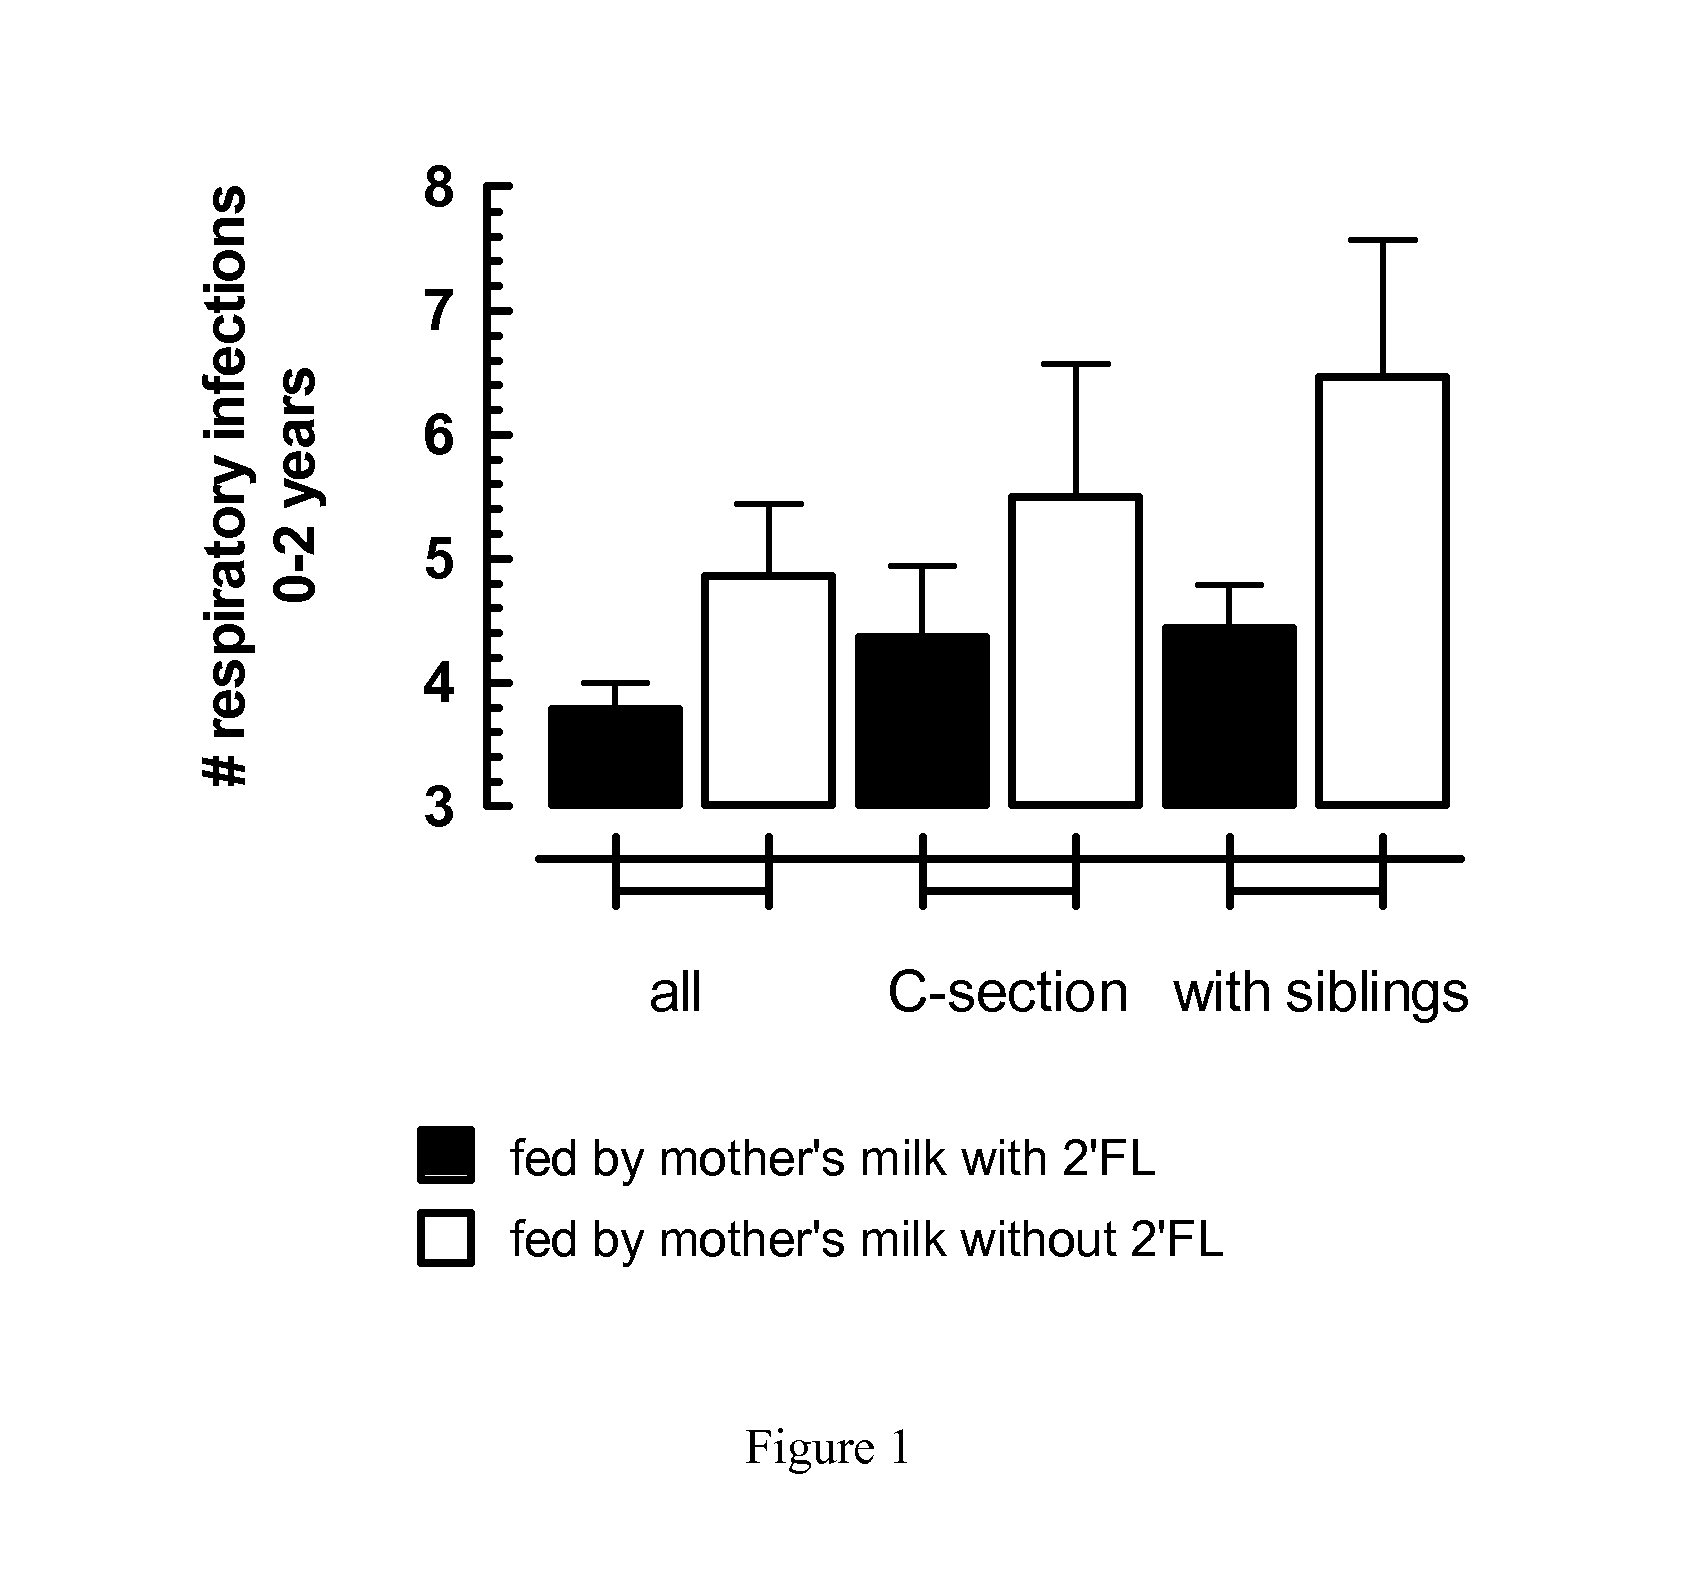 Compositions for use in the prevention or treatment of urt infections in infants or young children at risk